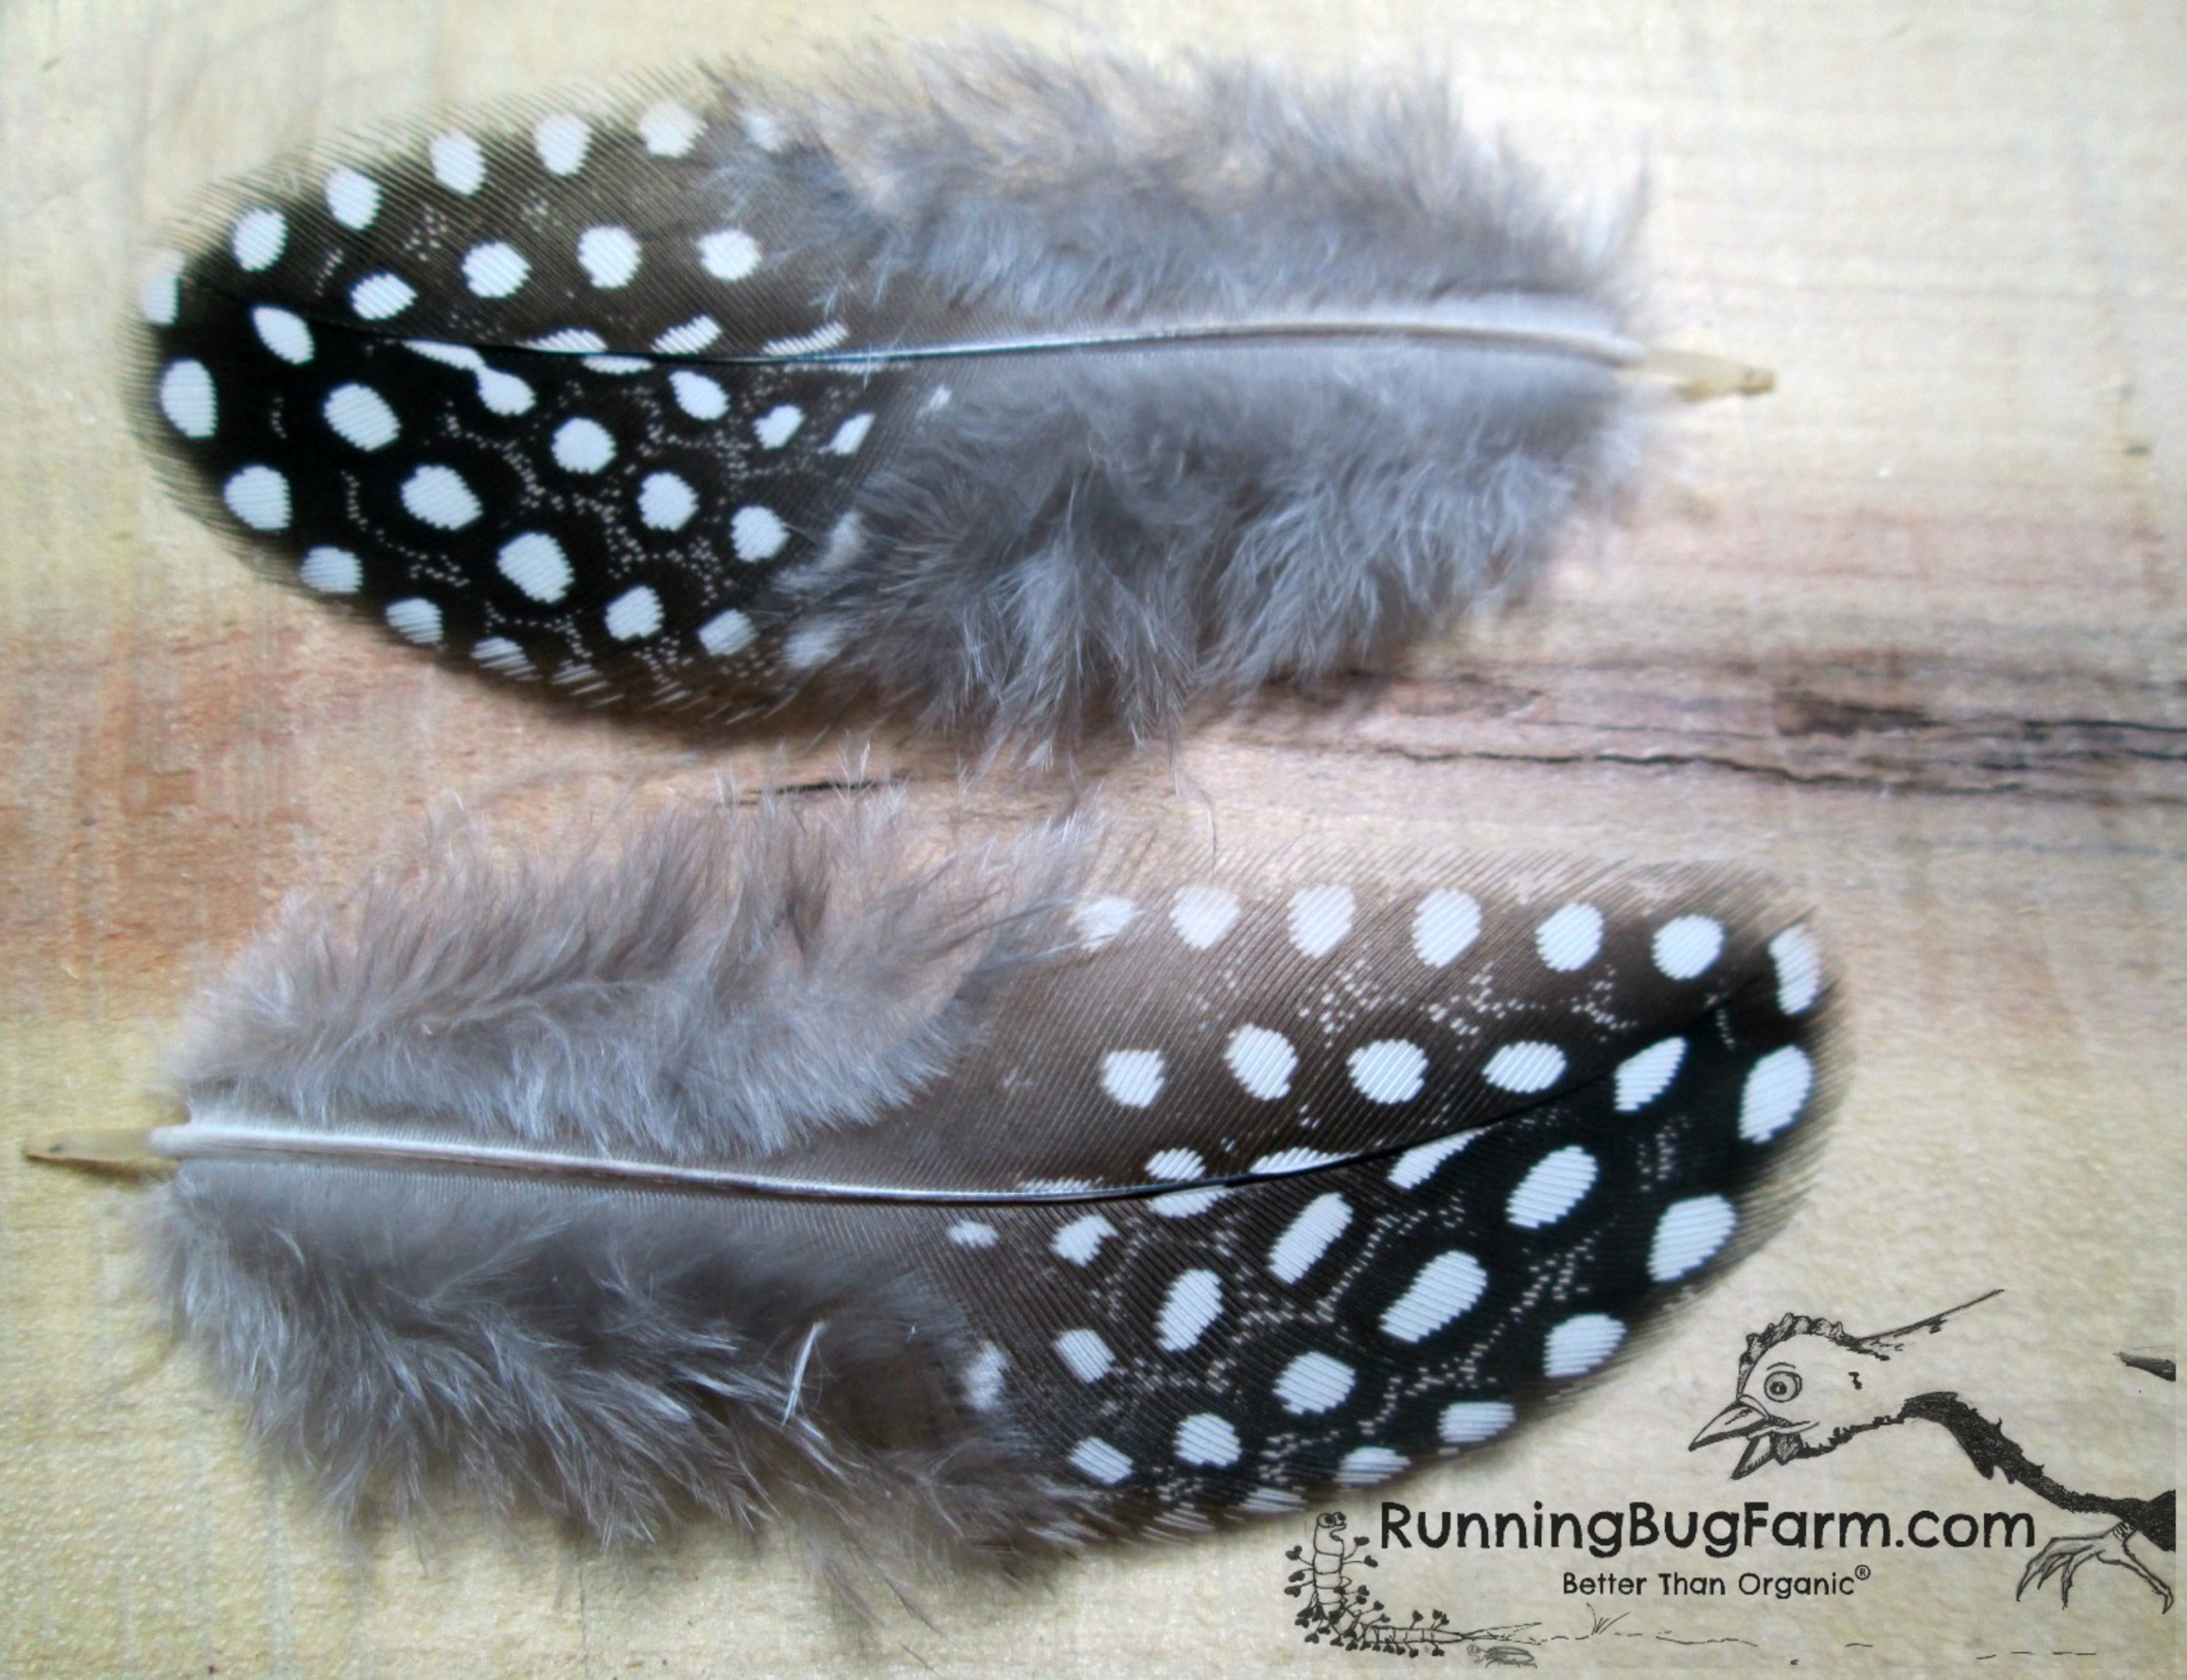 Small Guinea Fowl Wing Feathers with Polka Dots for Crafts Art and Decor, Ethical Plumage